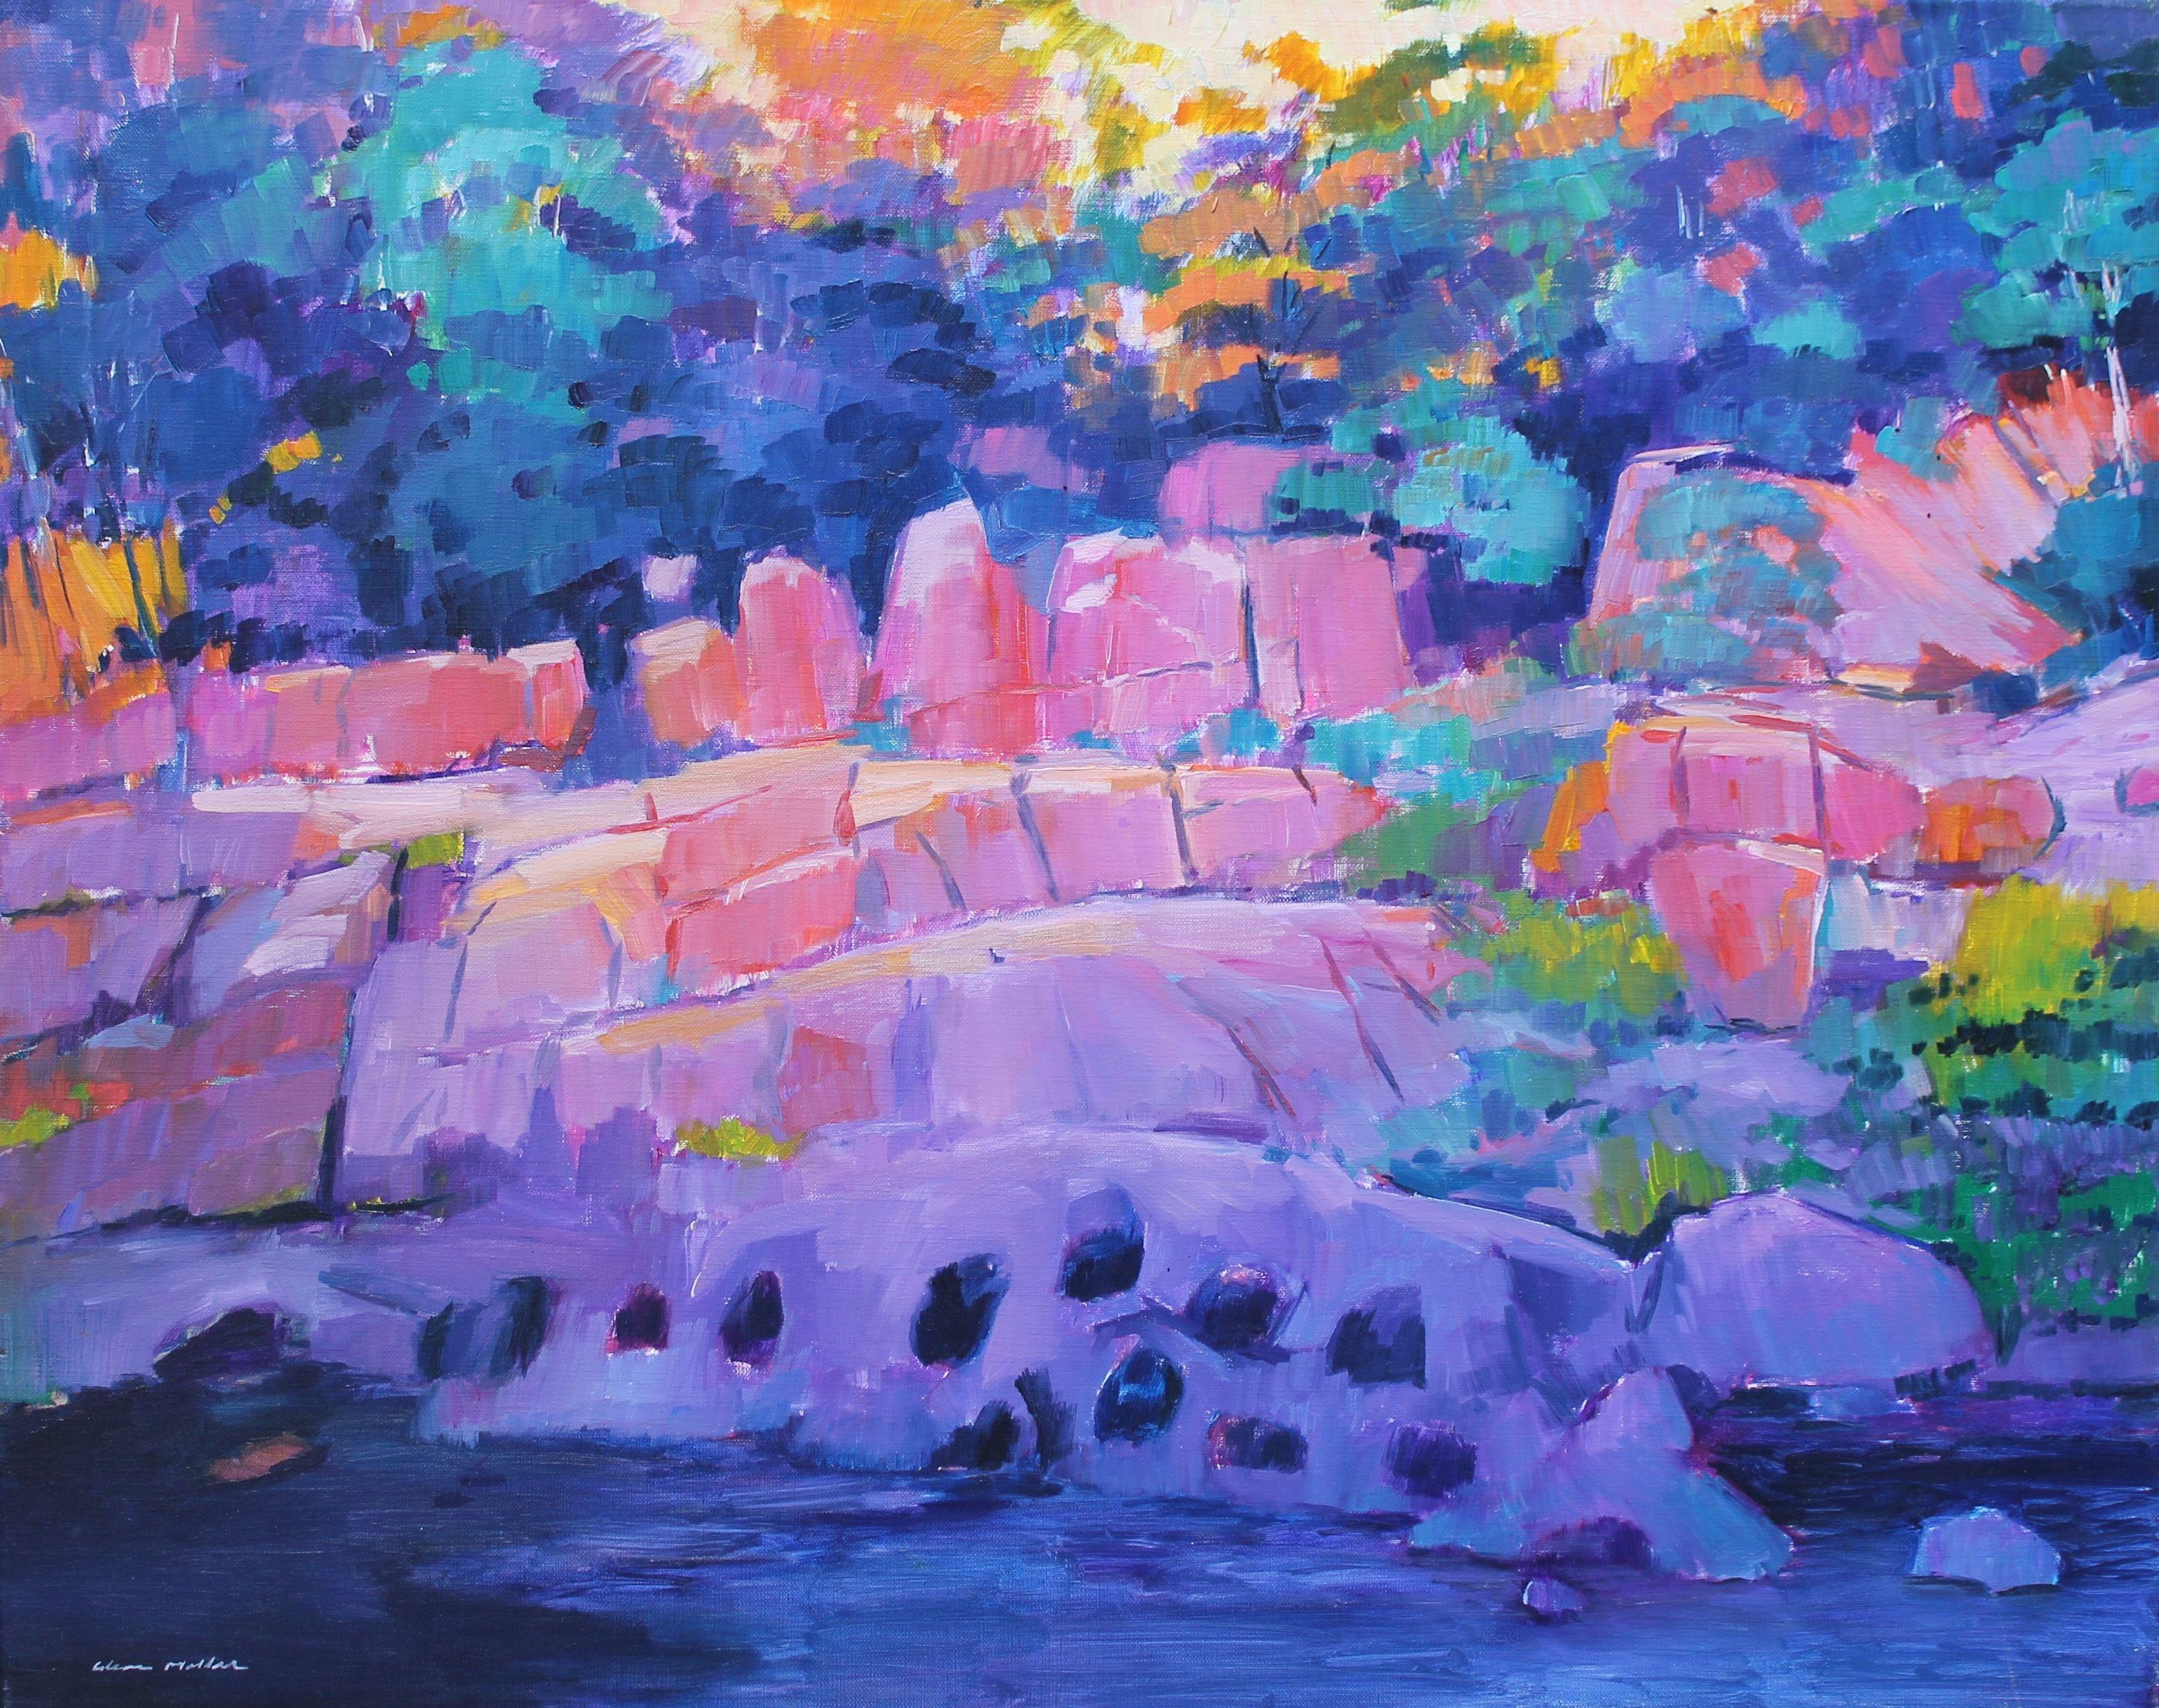 Cataract Gorge 1, Painting, Oil on Canvas